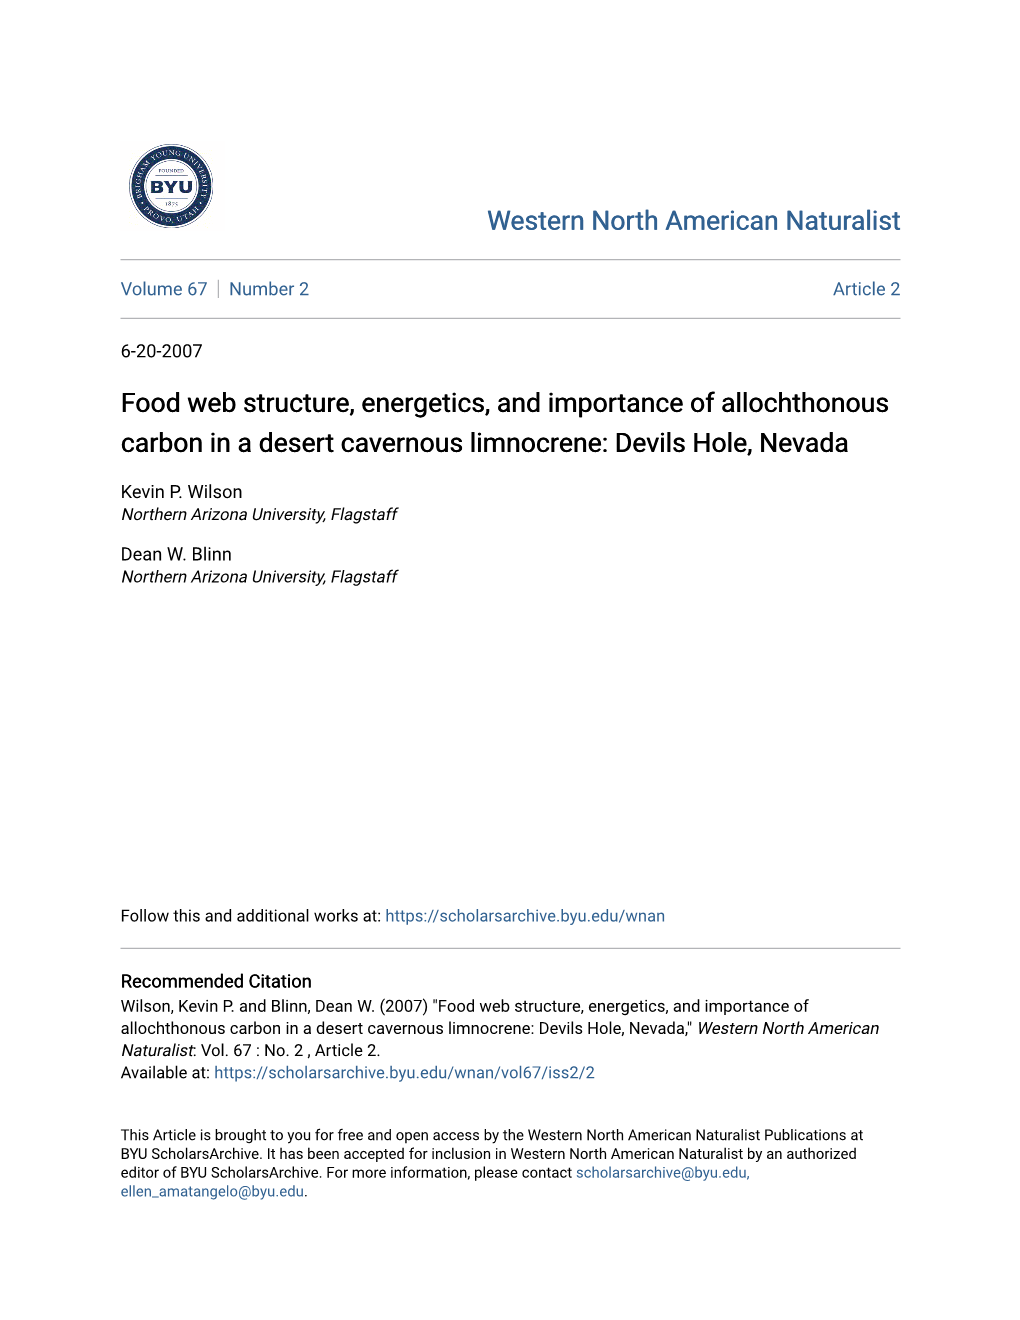 Food Web Structure, Energetics, and Importance of Allochthonous Carbon in a Desert Cavernous Limnocrene: Devils Hole, Nevada